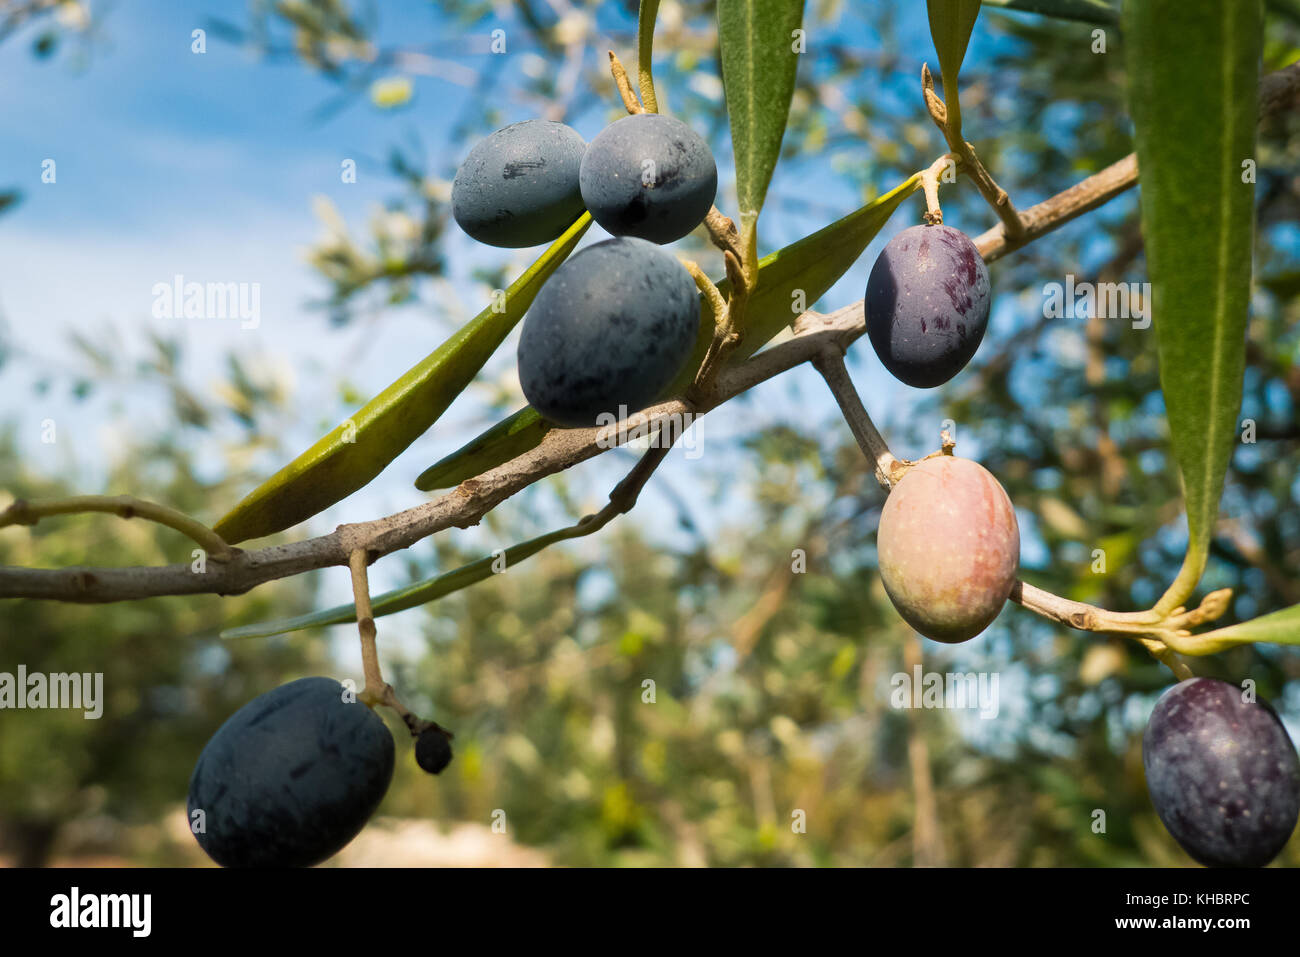 Olives growing in mediterranean climate. Stock Photo